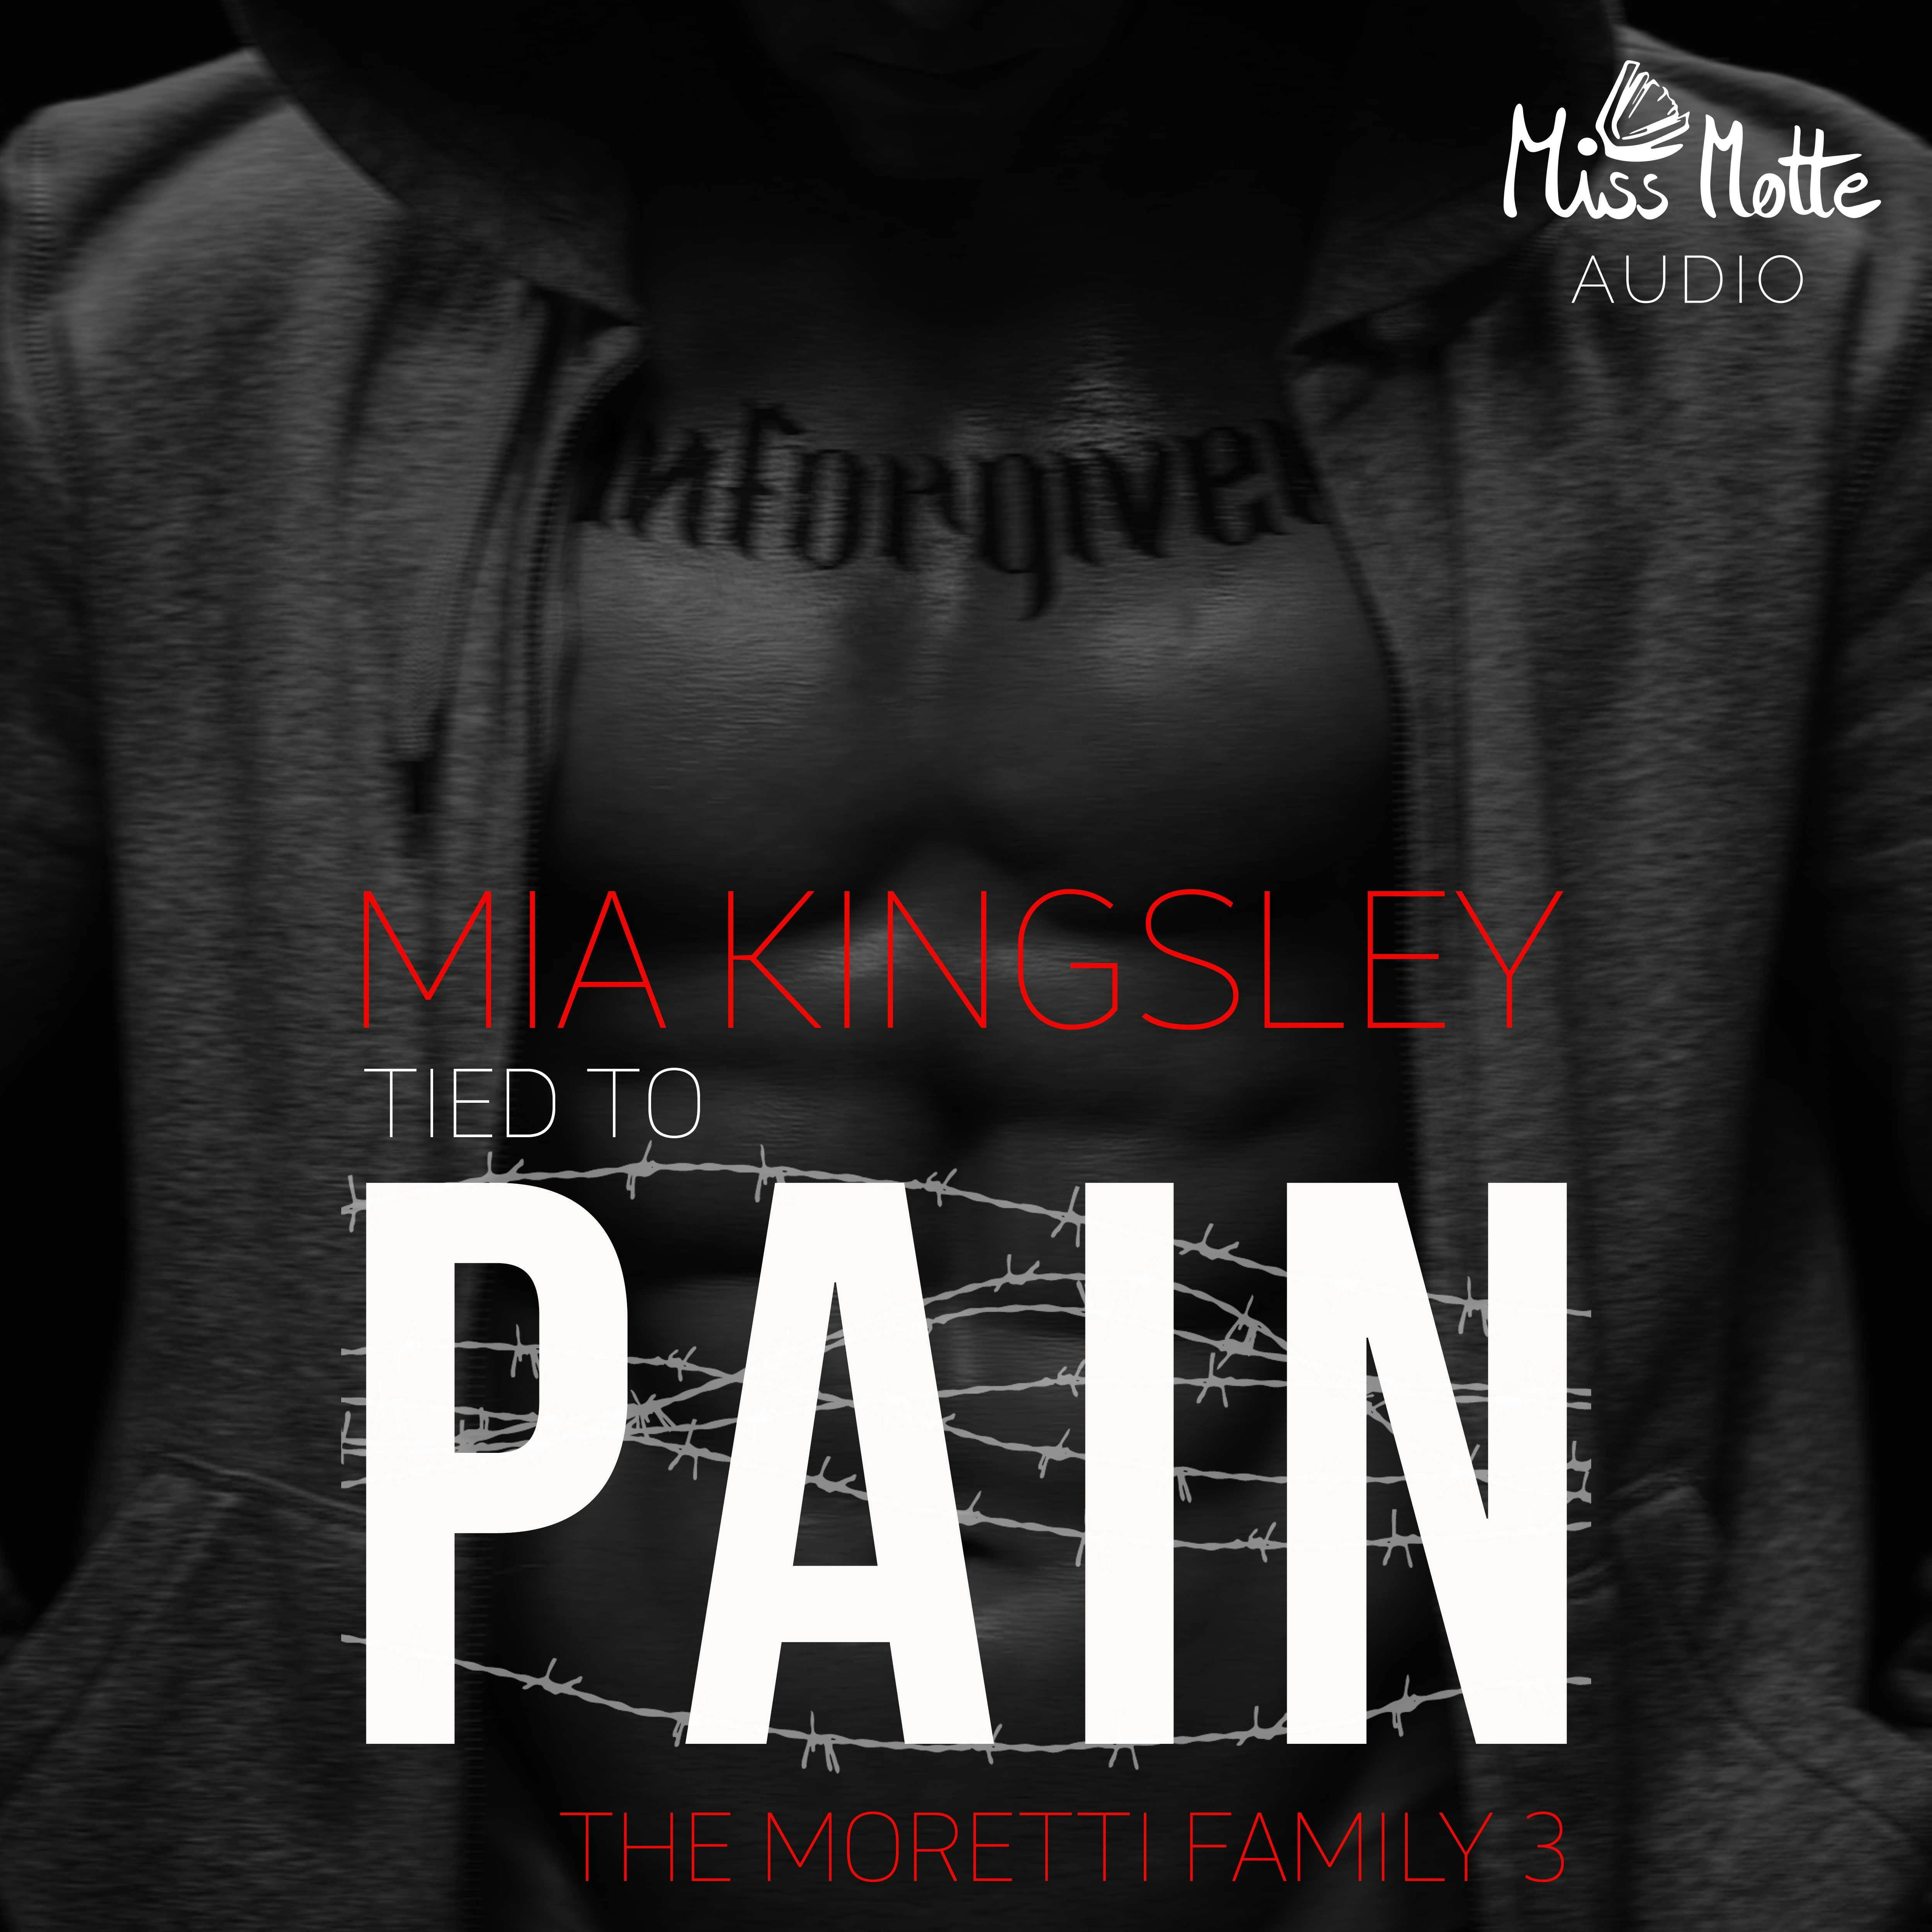 Tied To Pain: The Moretti Family 3 - undefined